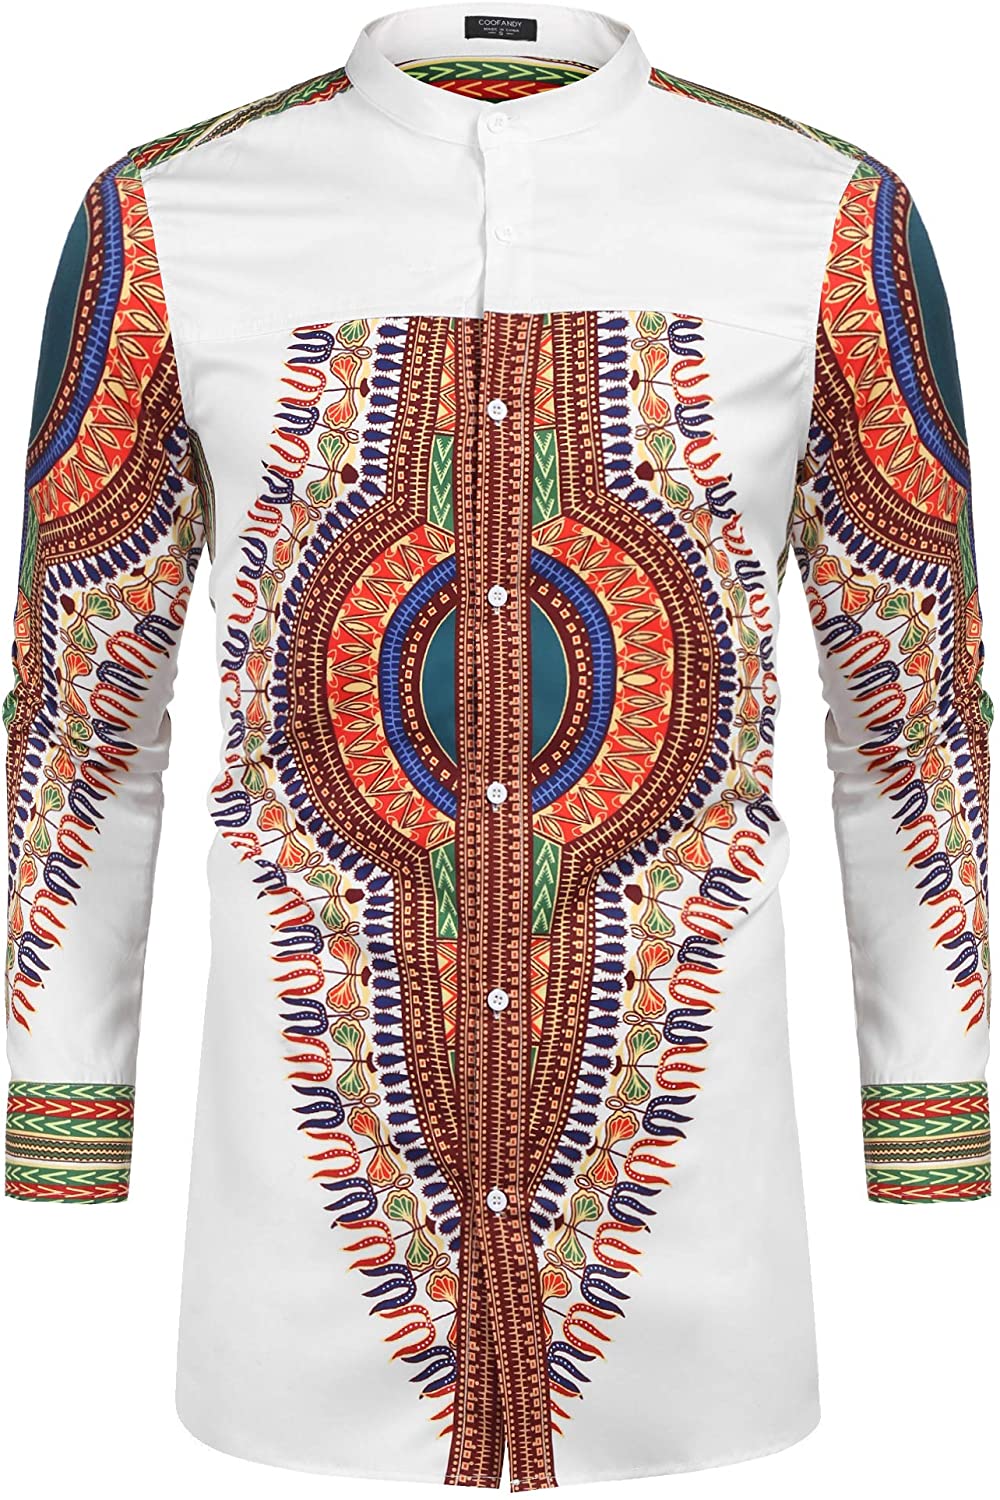 Zimaes-Men Floral Print Long Sleeve African Buttoned Dashiki T-Shirts 